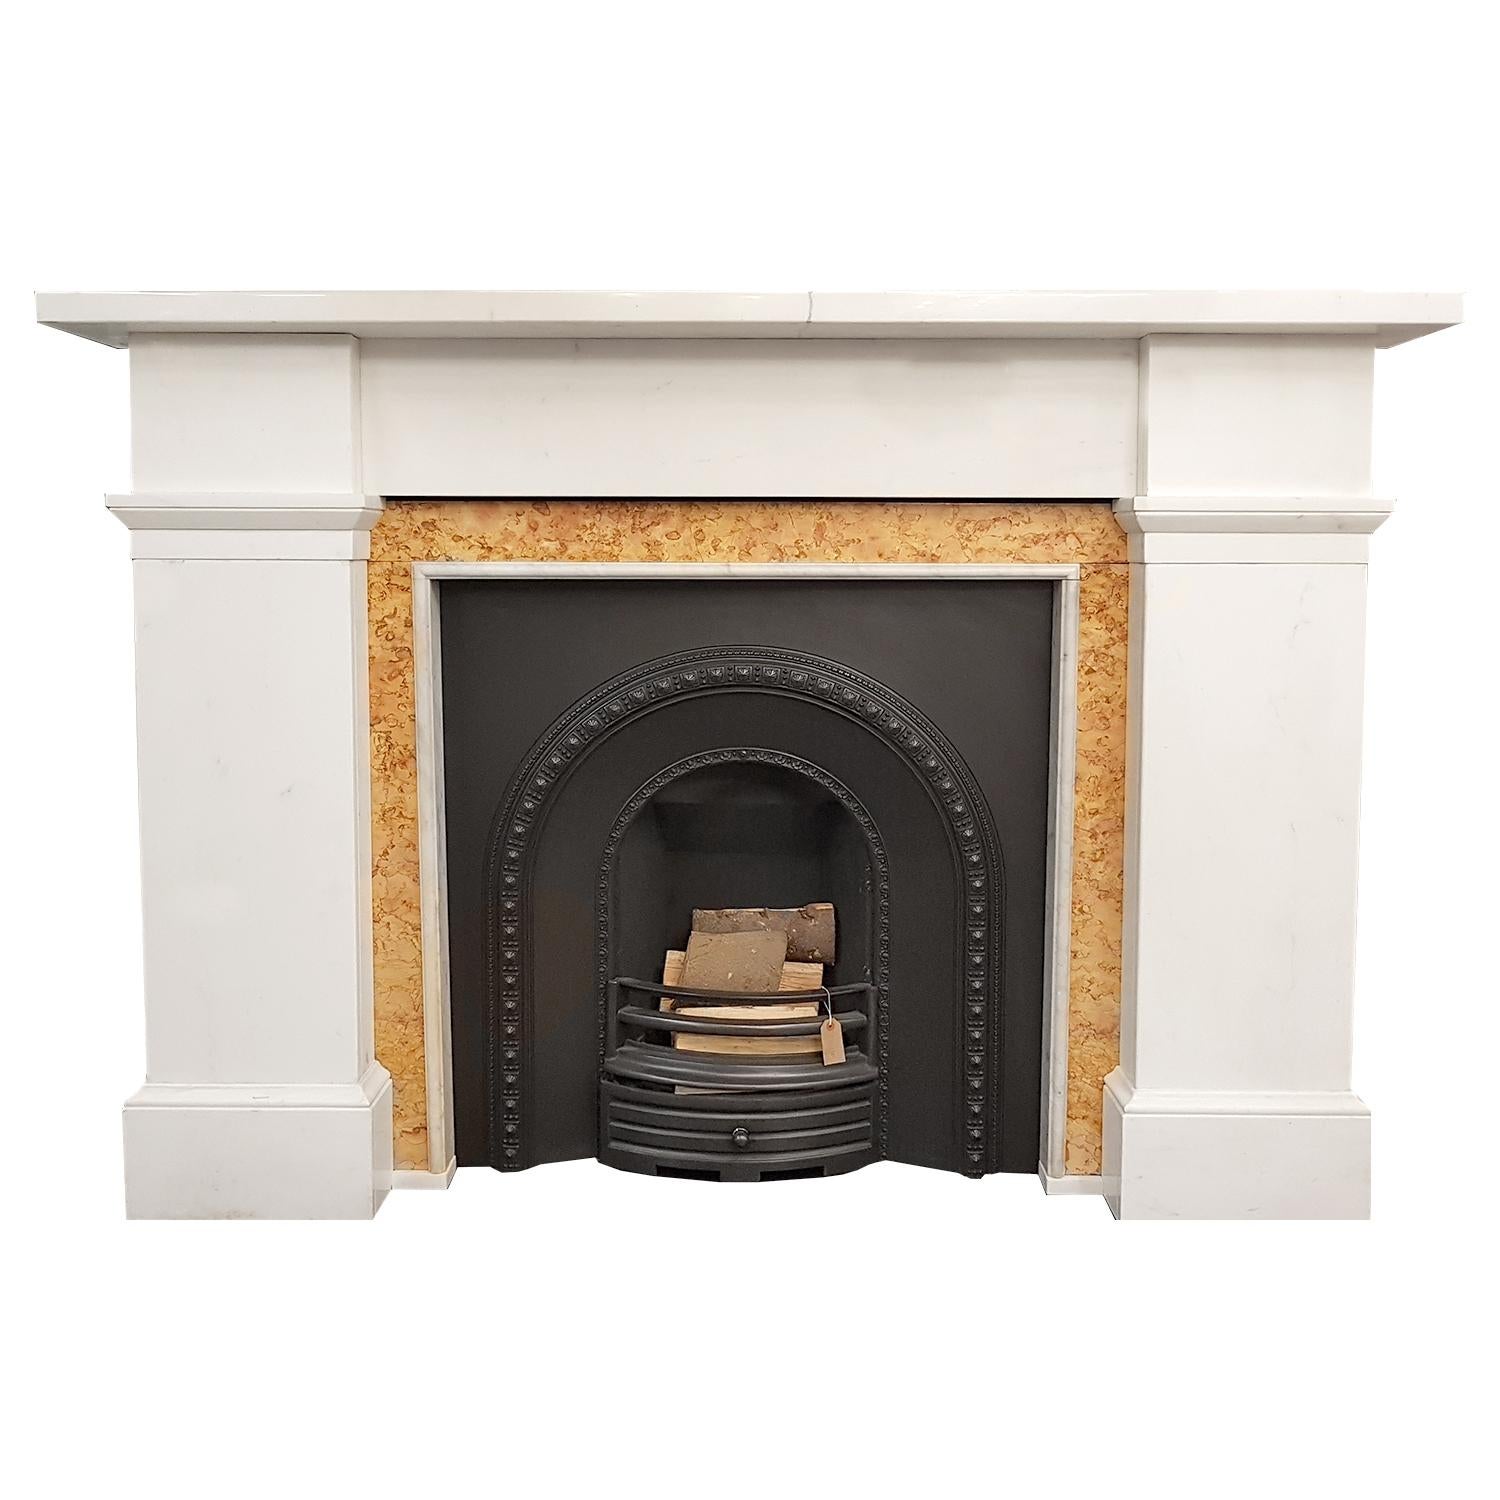 Statuario Marble Fireplace Mantel with Sienna Slips For Sale